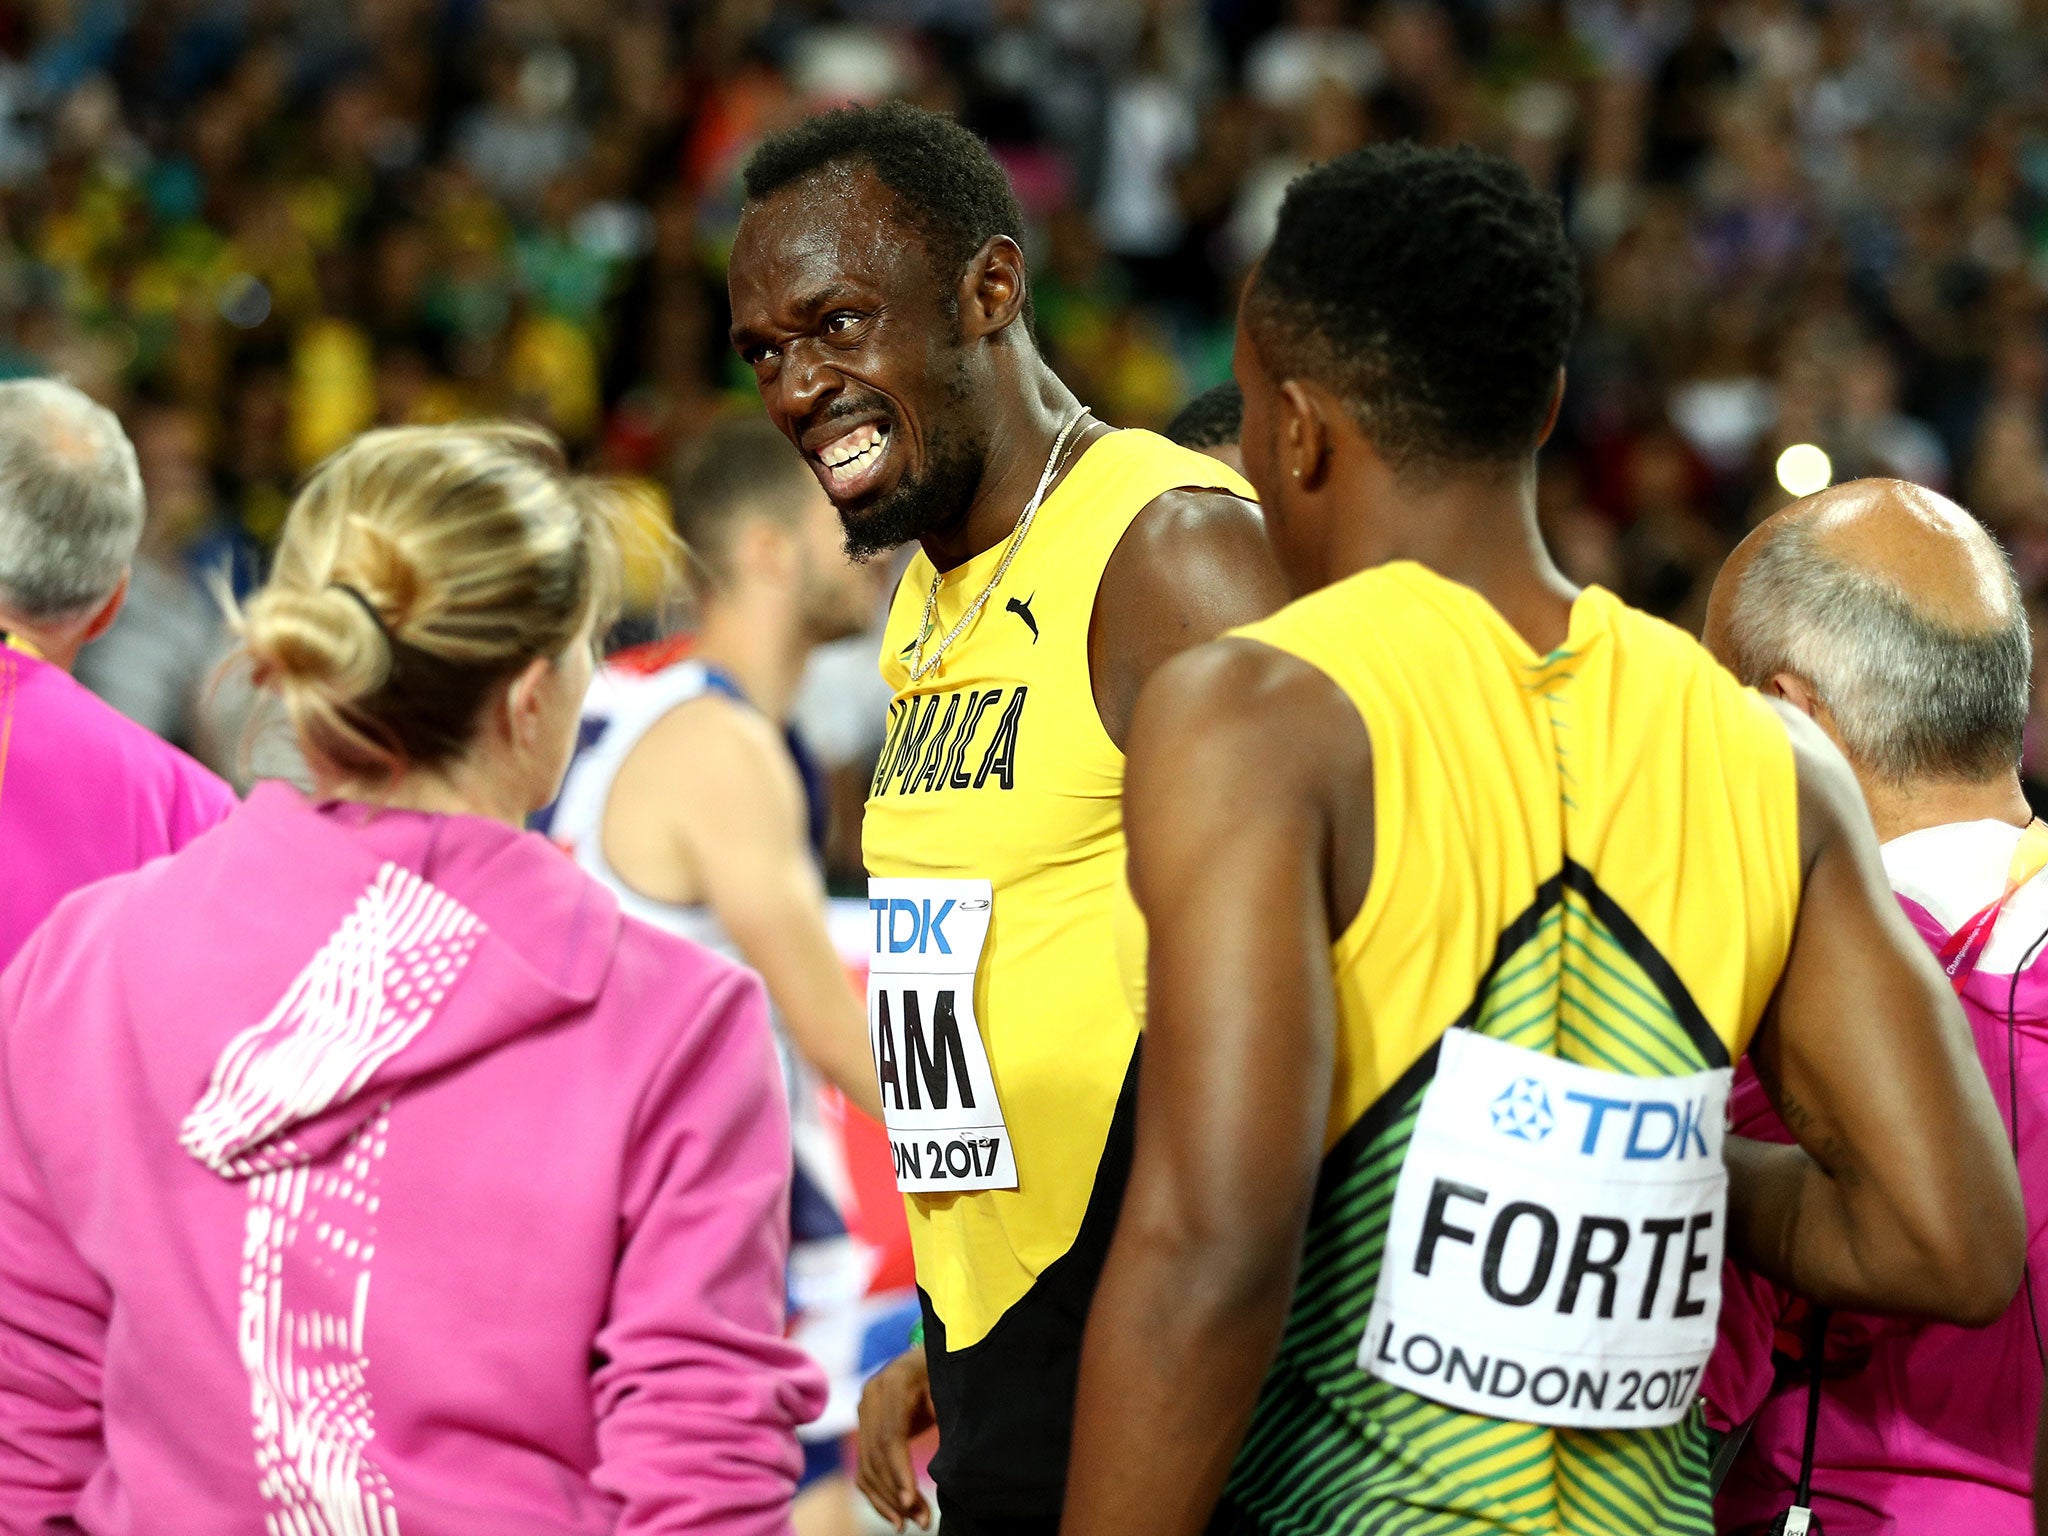 Usain Bolt suffered 'cramp' to end his final race at the World Athletics Championships in injury